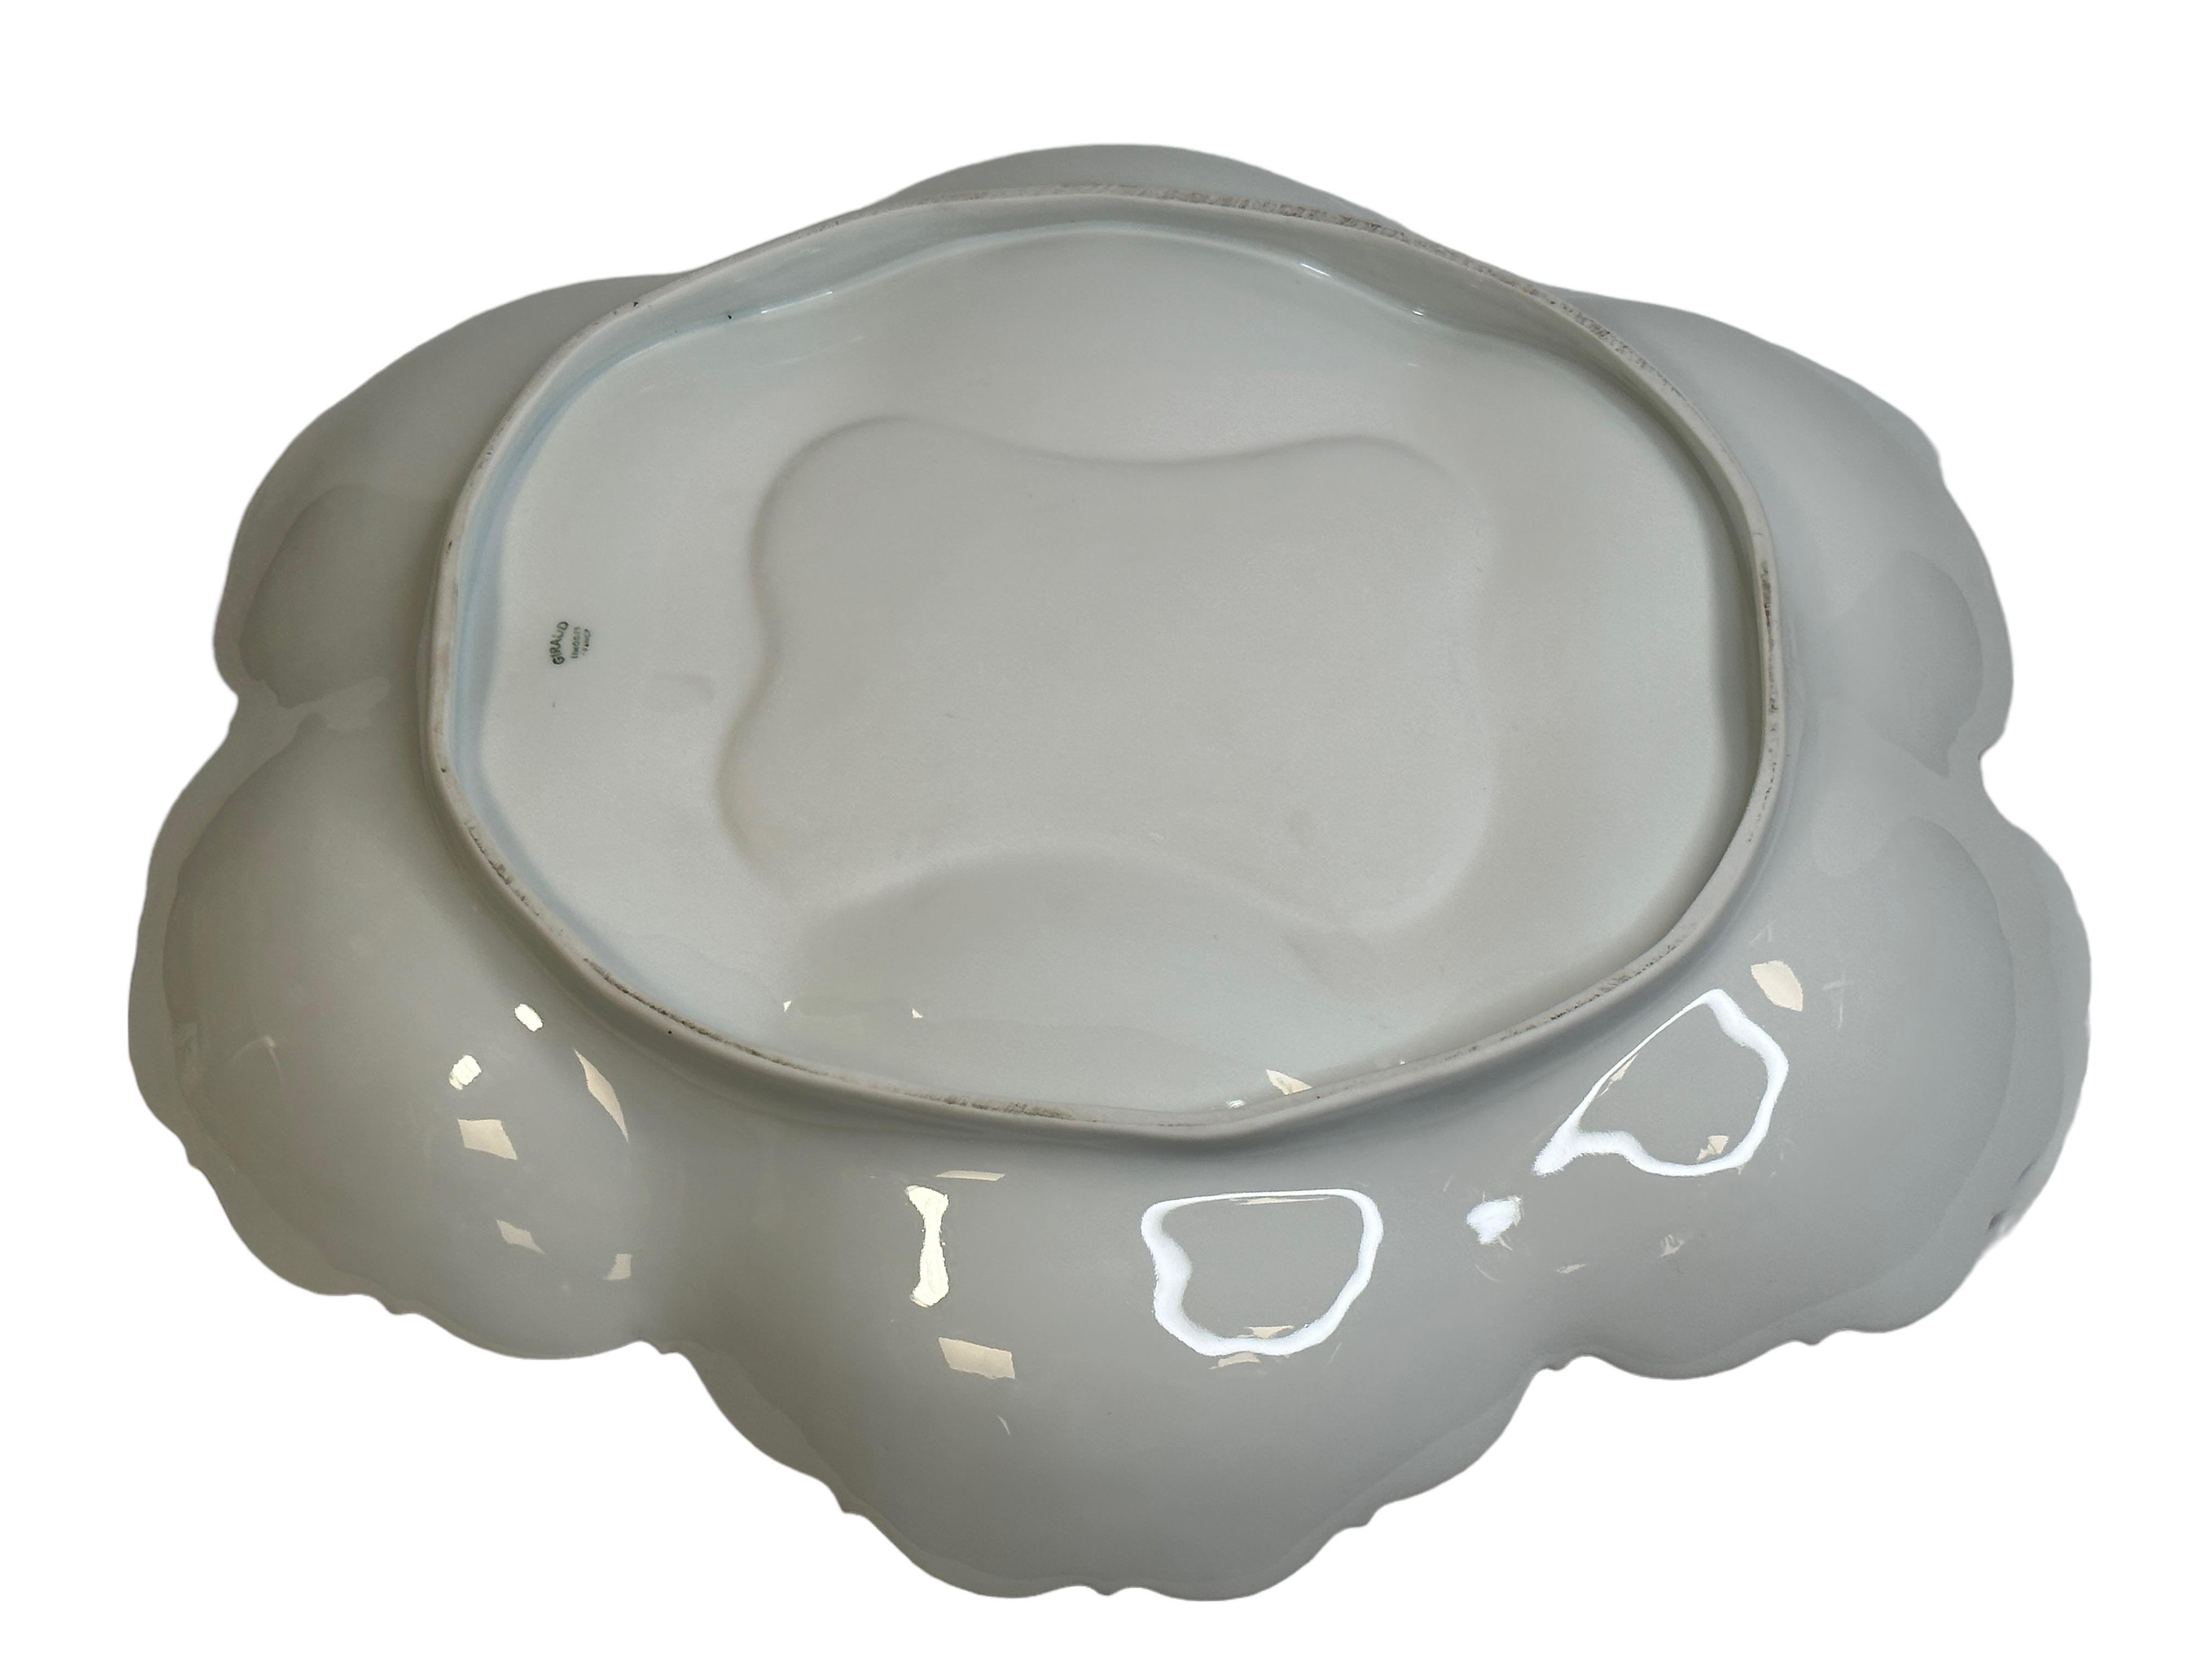 Exceptional Shell Shaped Limoges China Porcelain Soup Tureen with Dolphin Decor For Sale 7